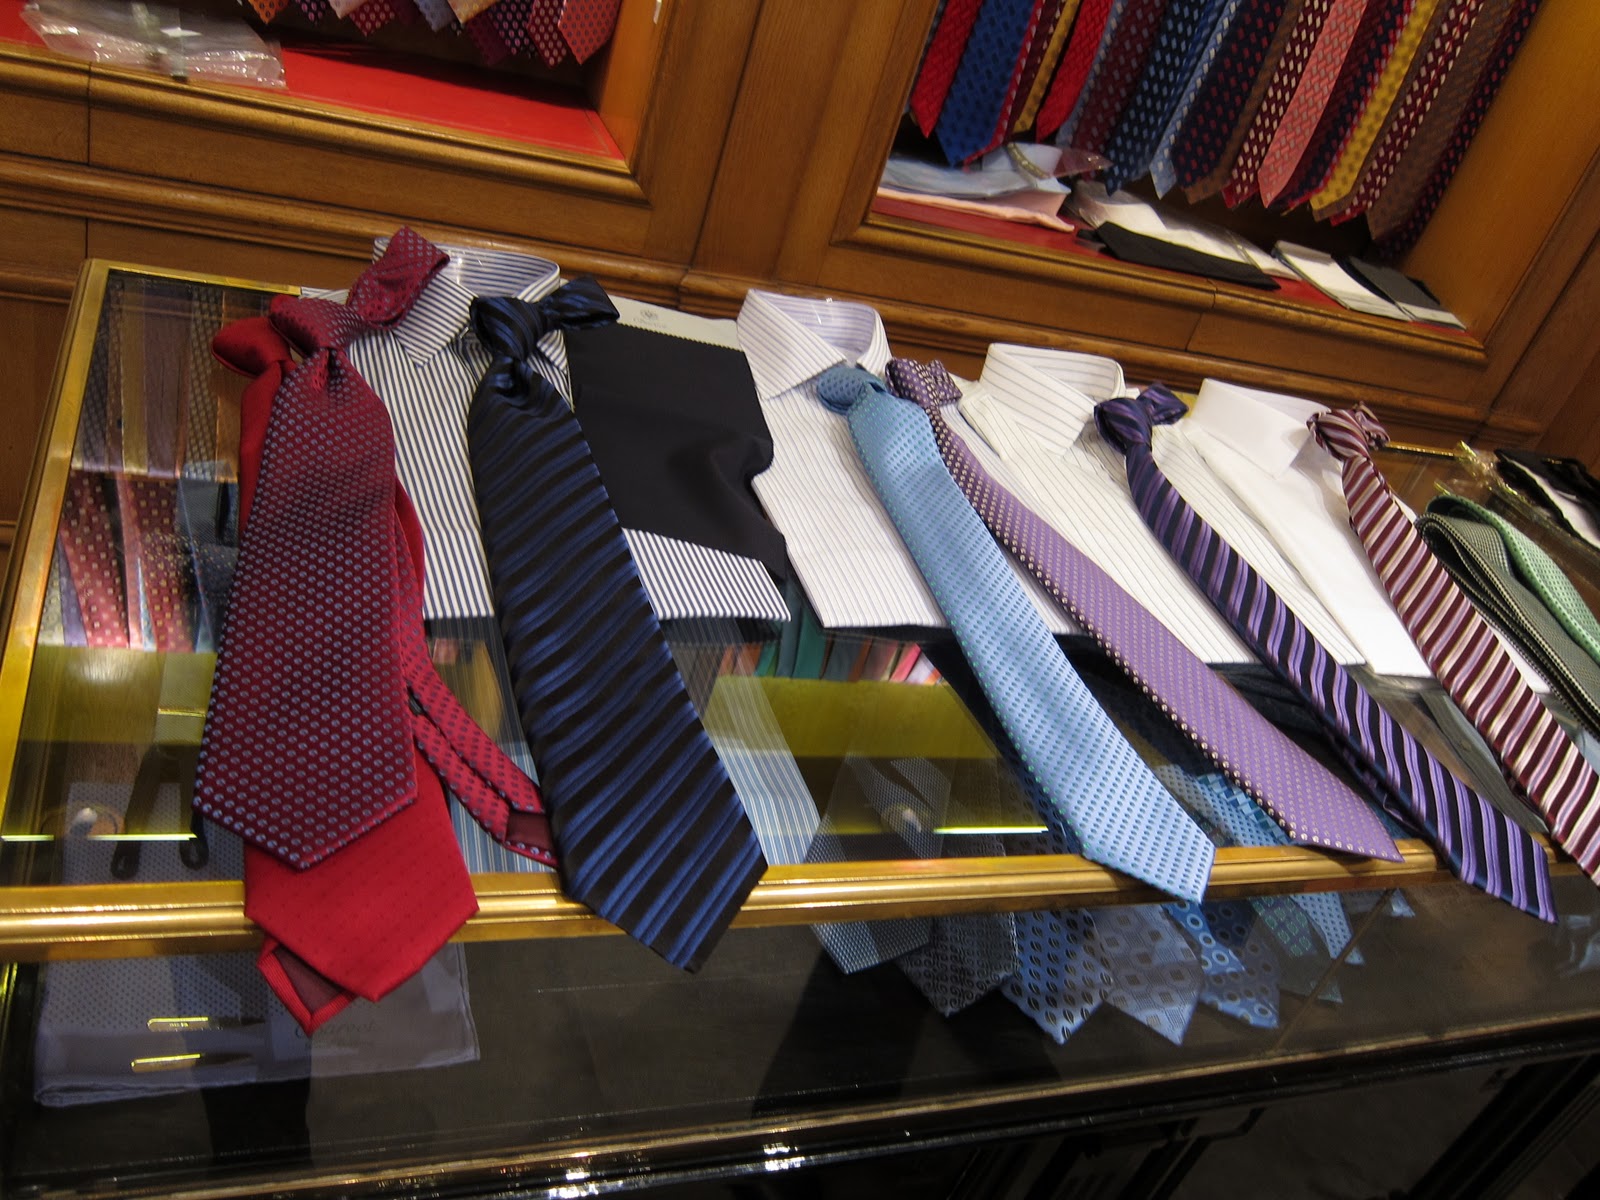 Kent's Travels: Charvet- The most luxurious shirts (and ties) in the world